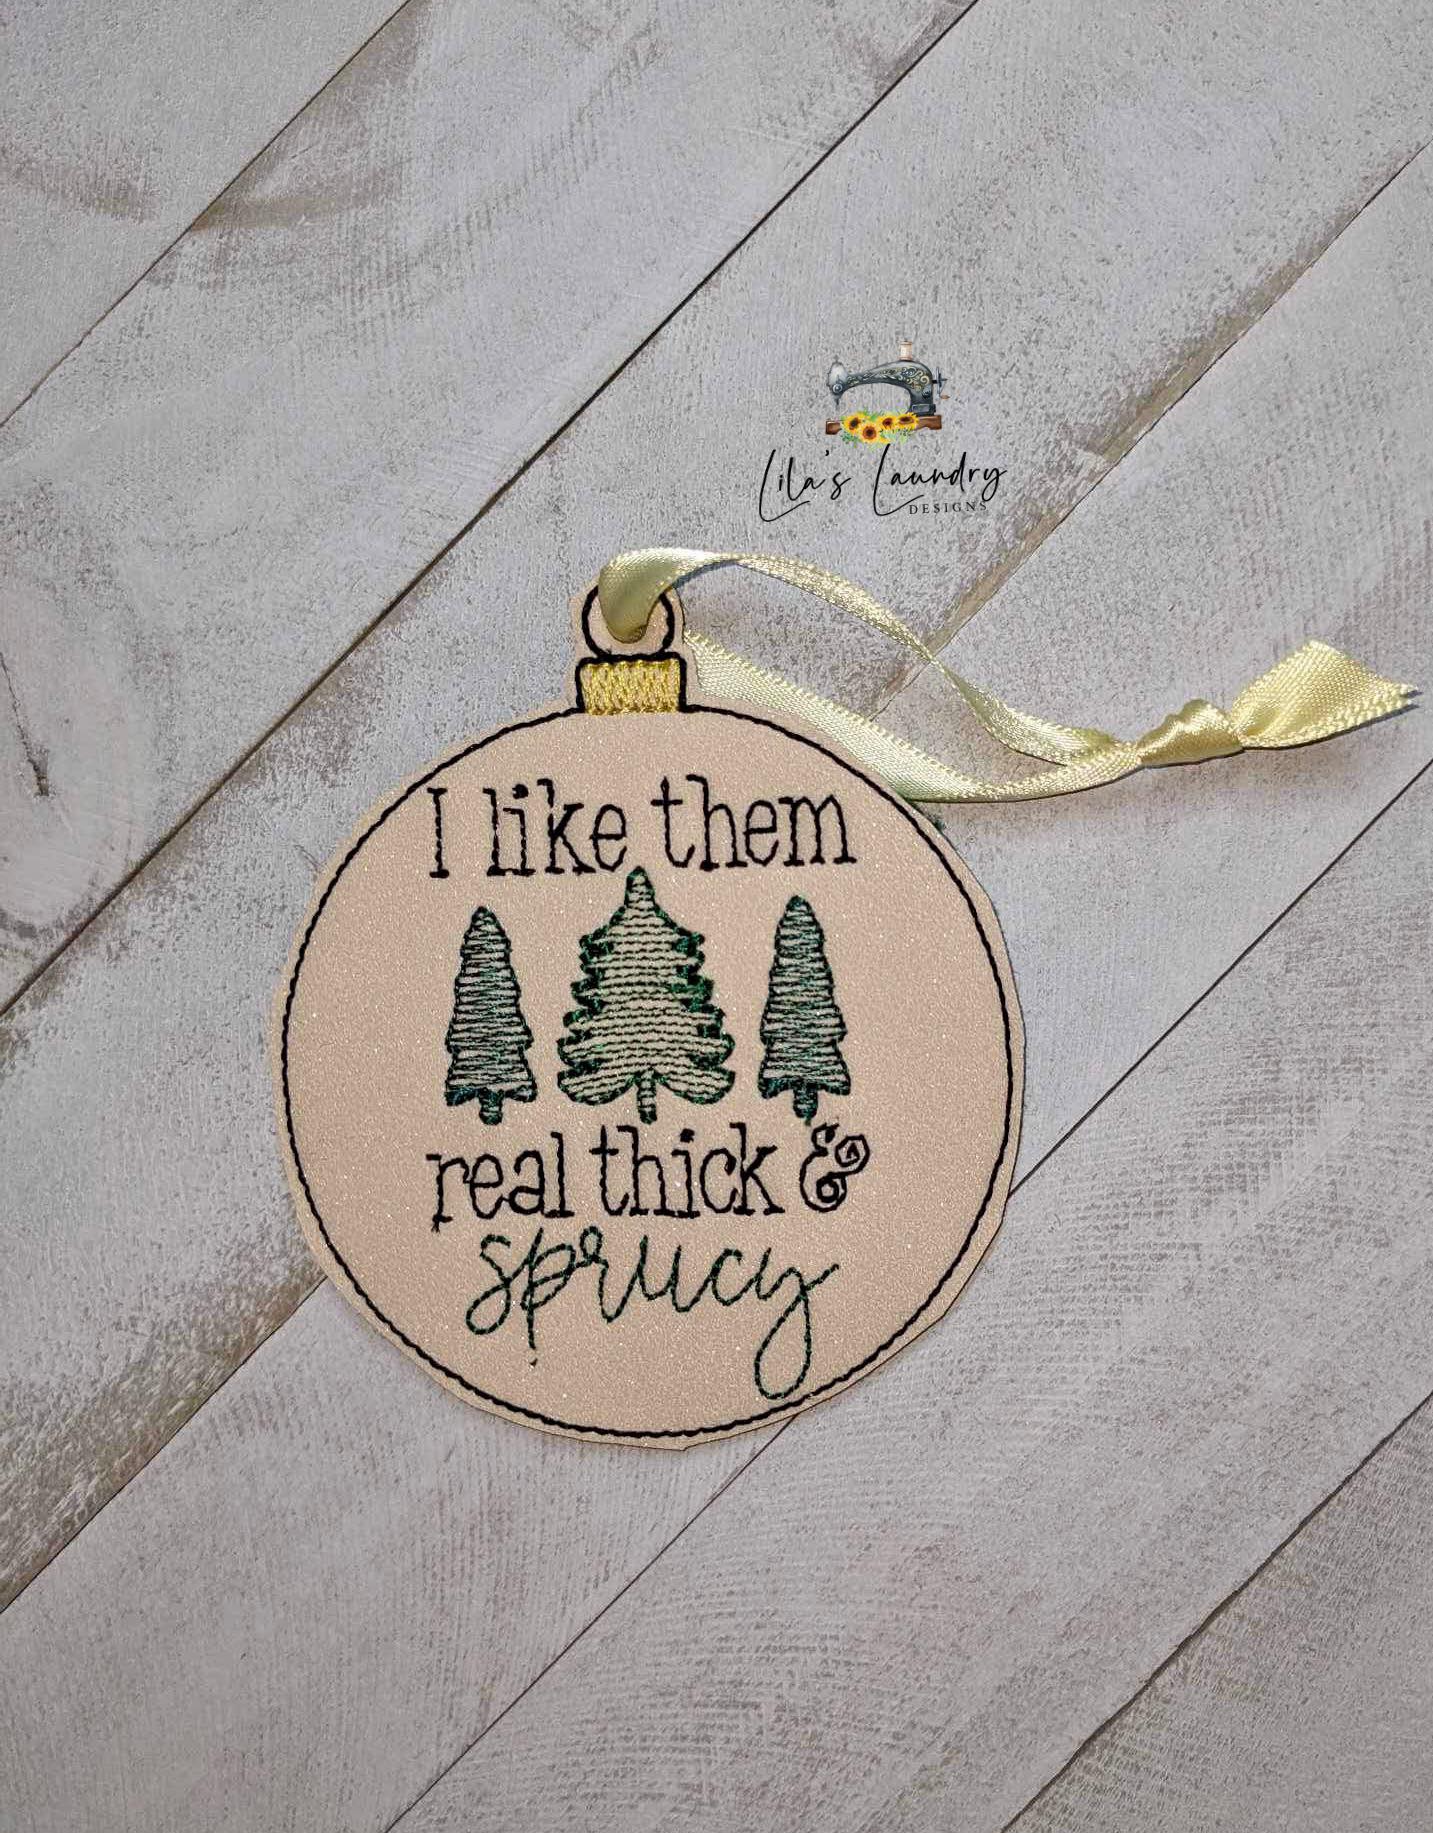 Thick and Sprucy Ornament - Digital File - Embroidery Design